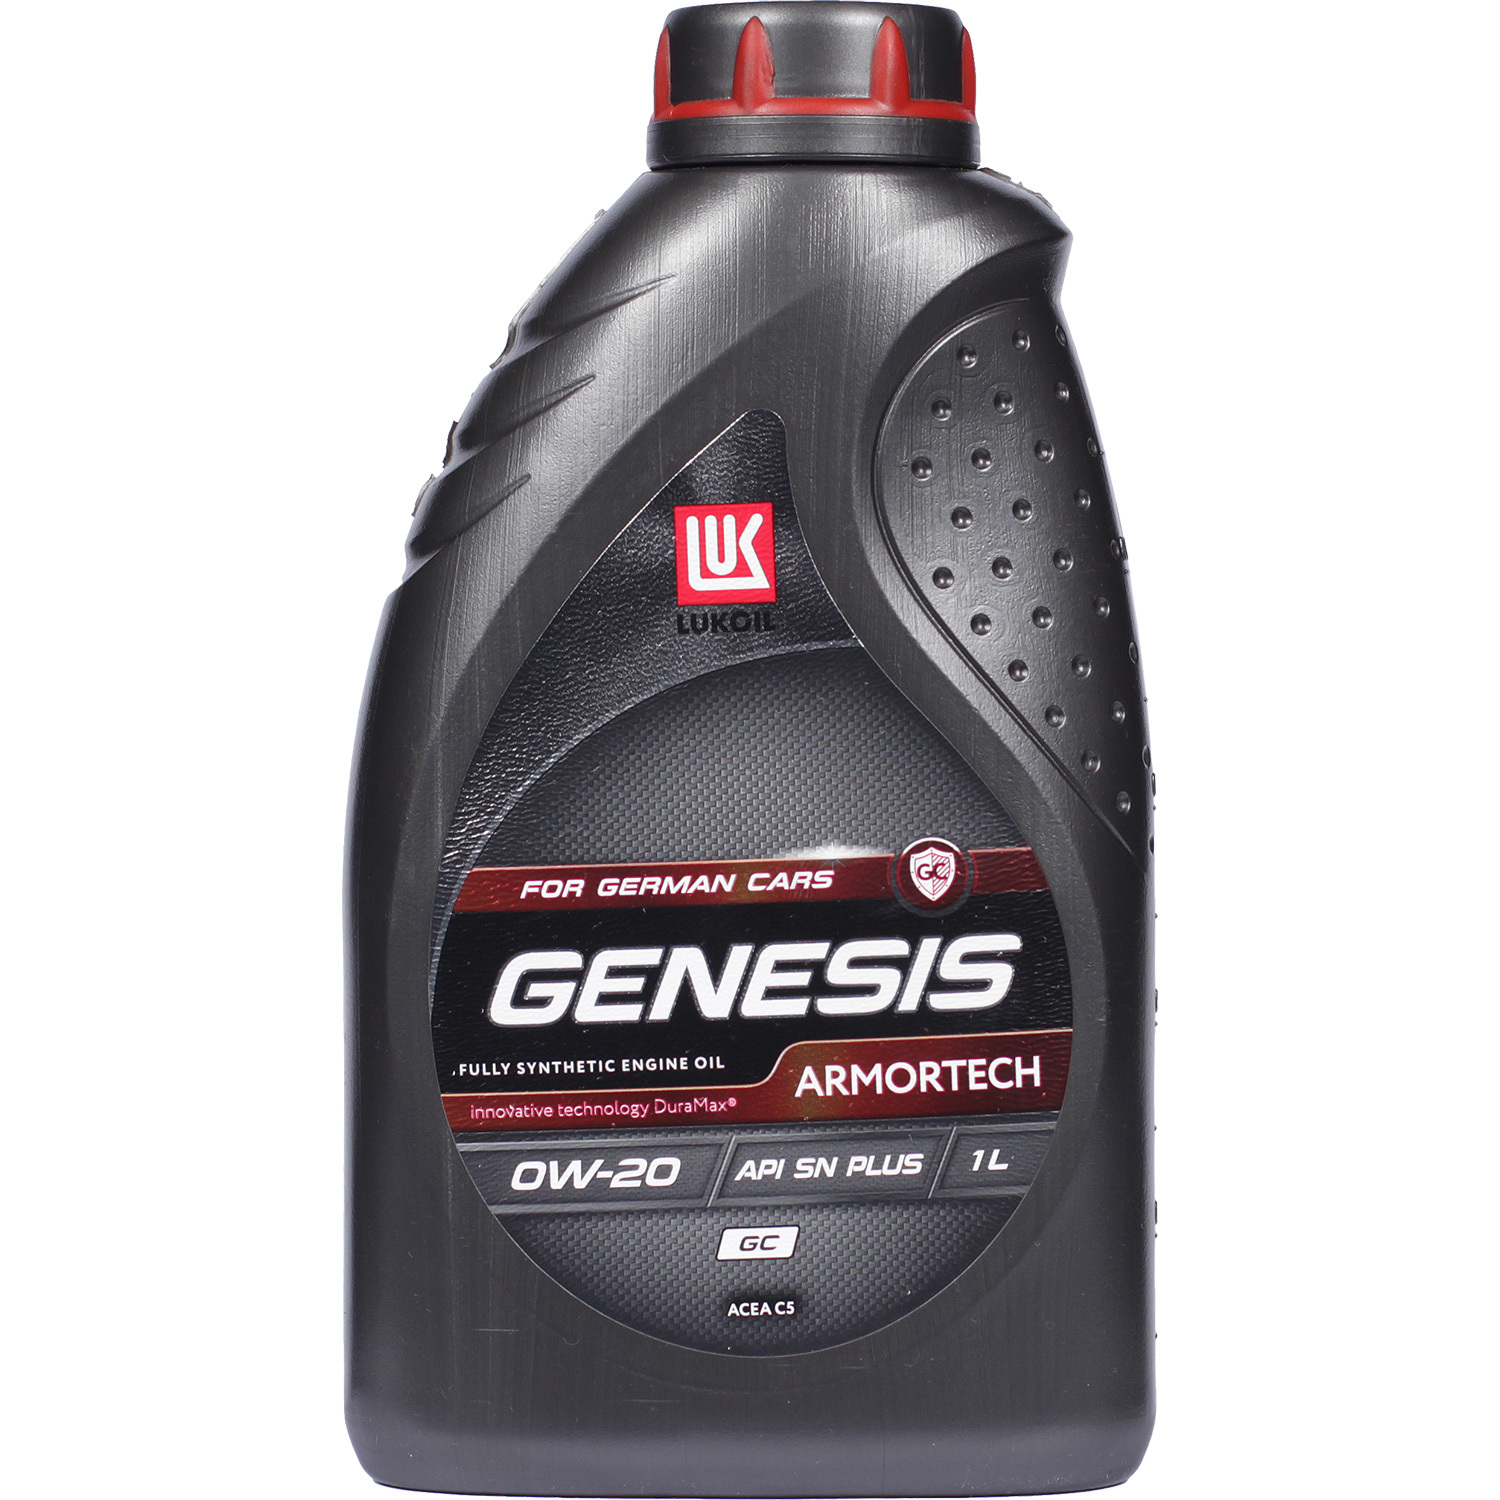 Lukoil Моторное масло Lukoil Genesis Armortech GC 0W-20, 1 л lukoil моторное масло lukoil genesis armortech jp 0w 20 4 л